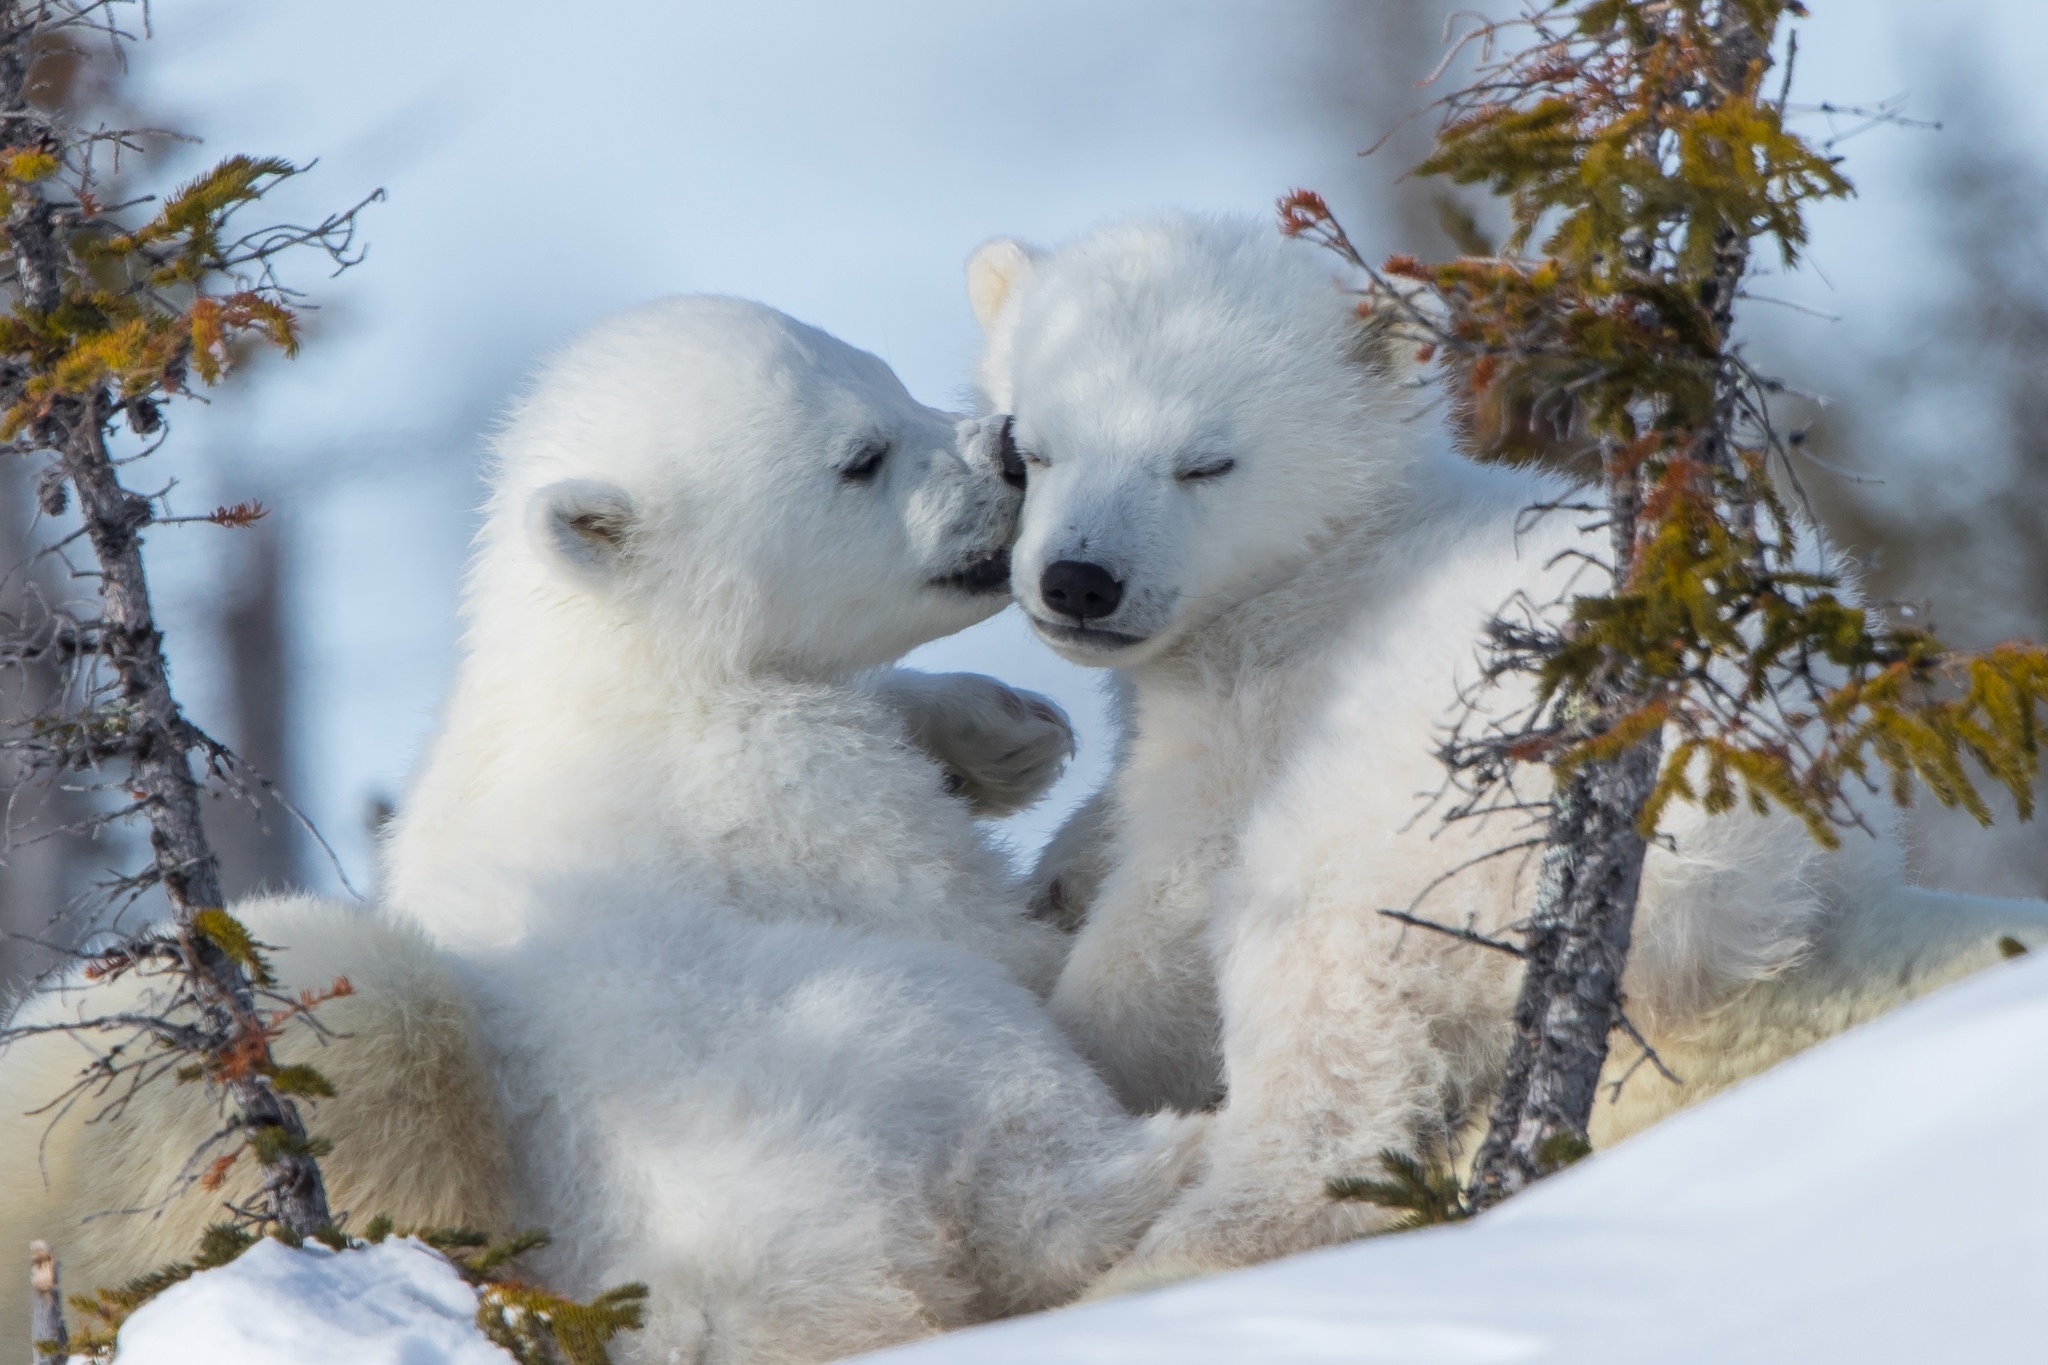 Little white bears playing in the snow